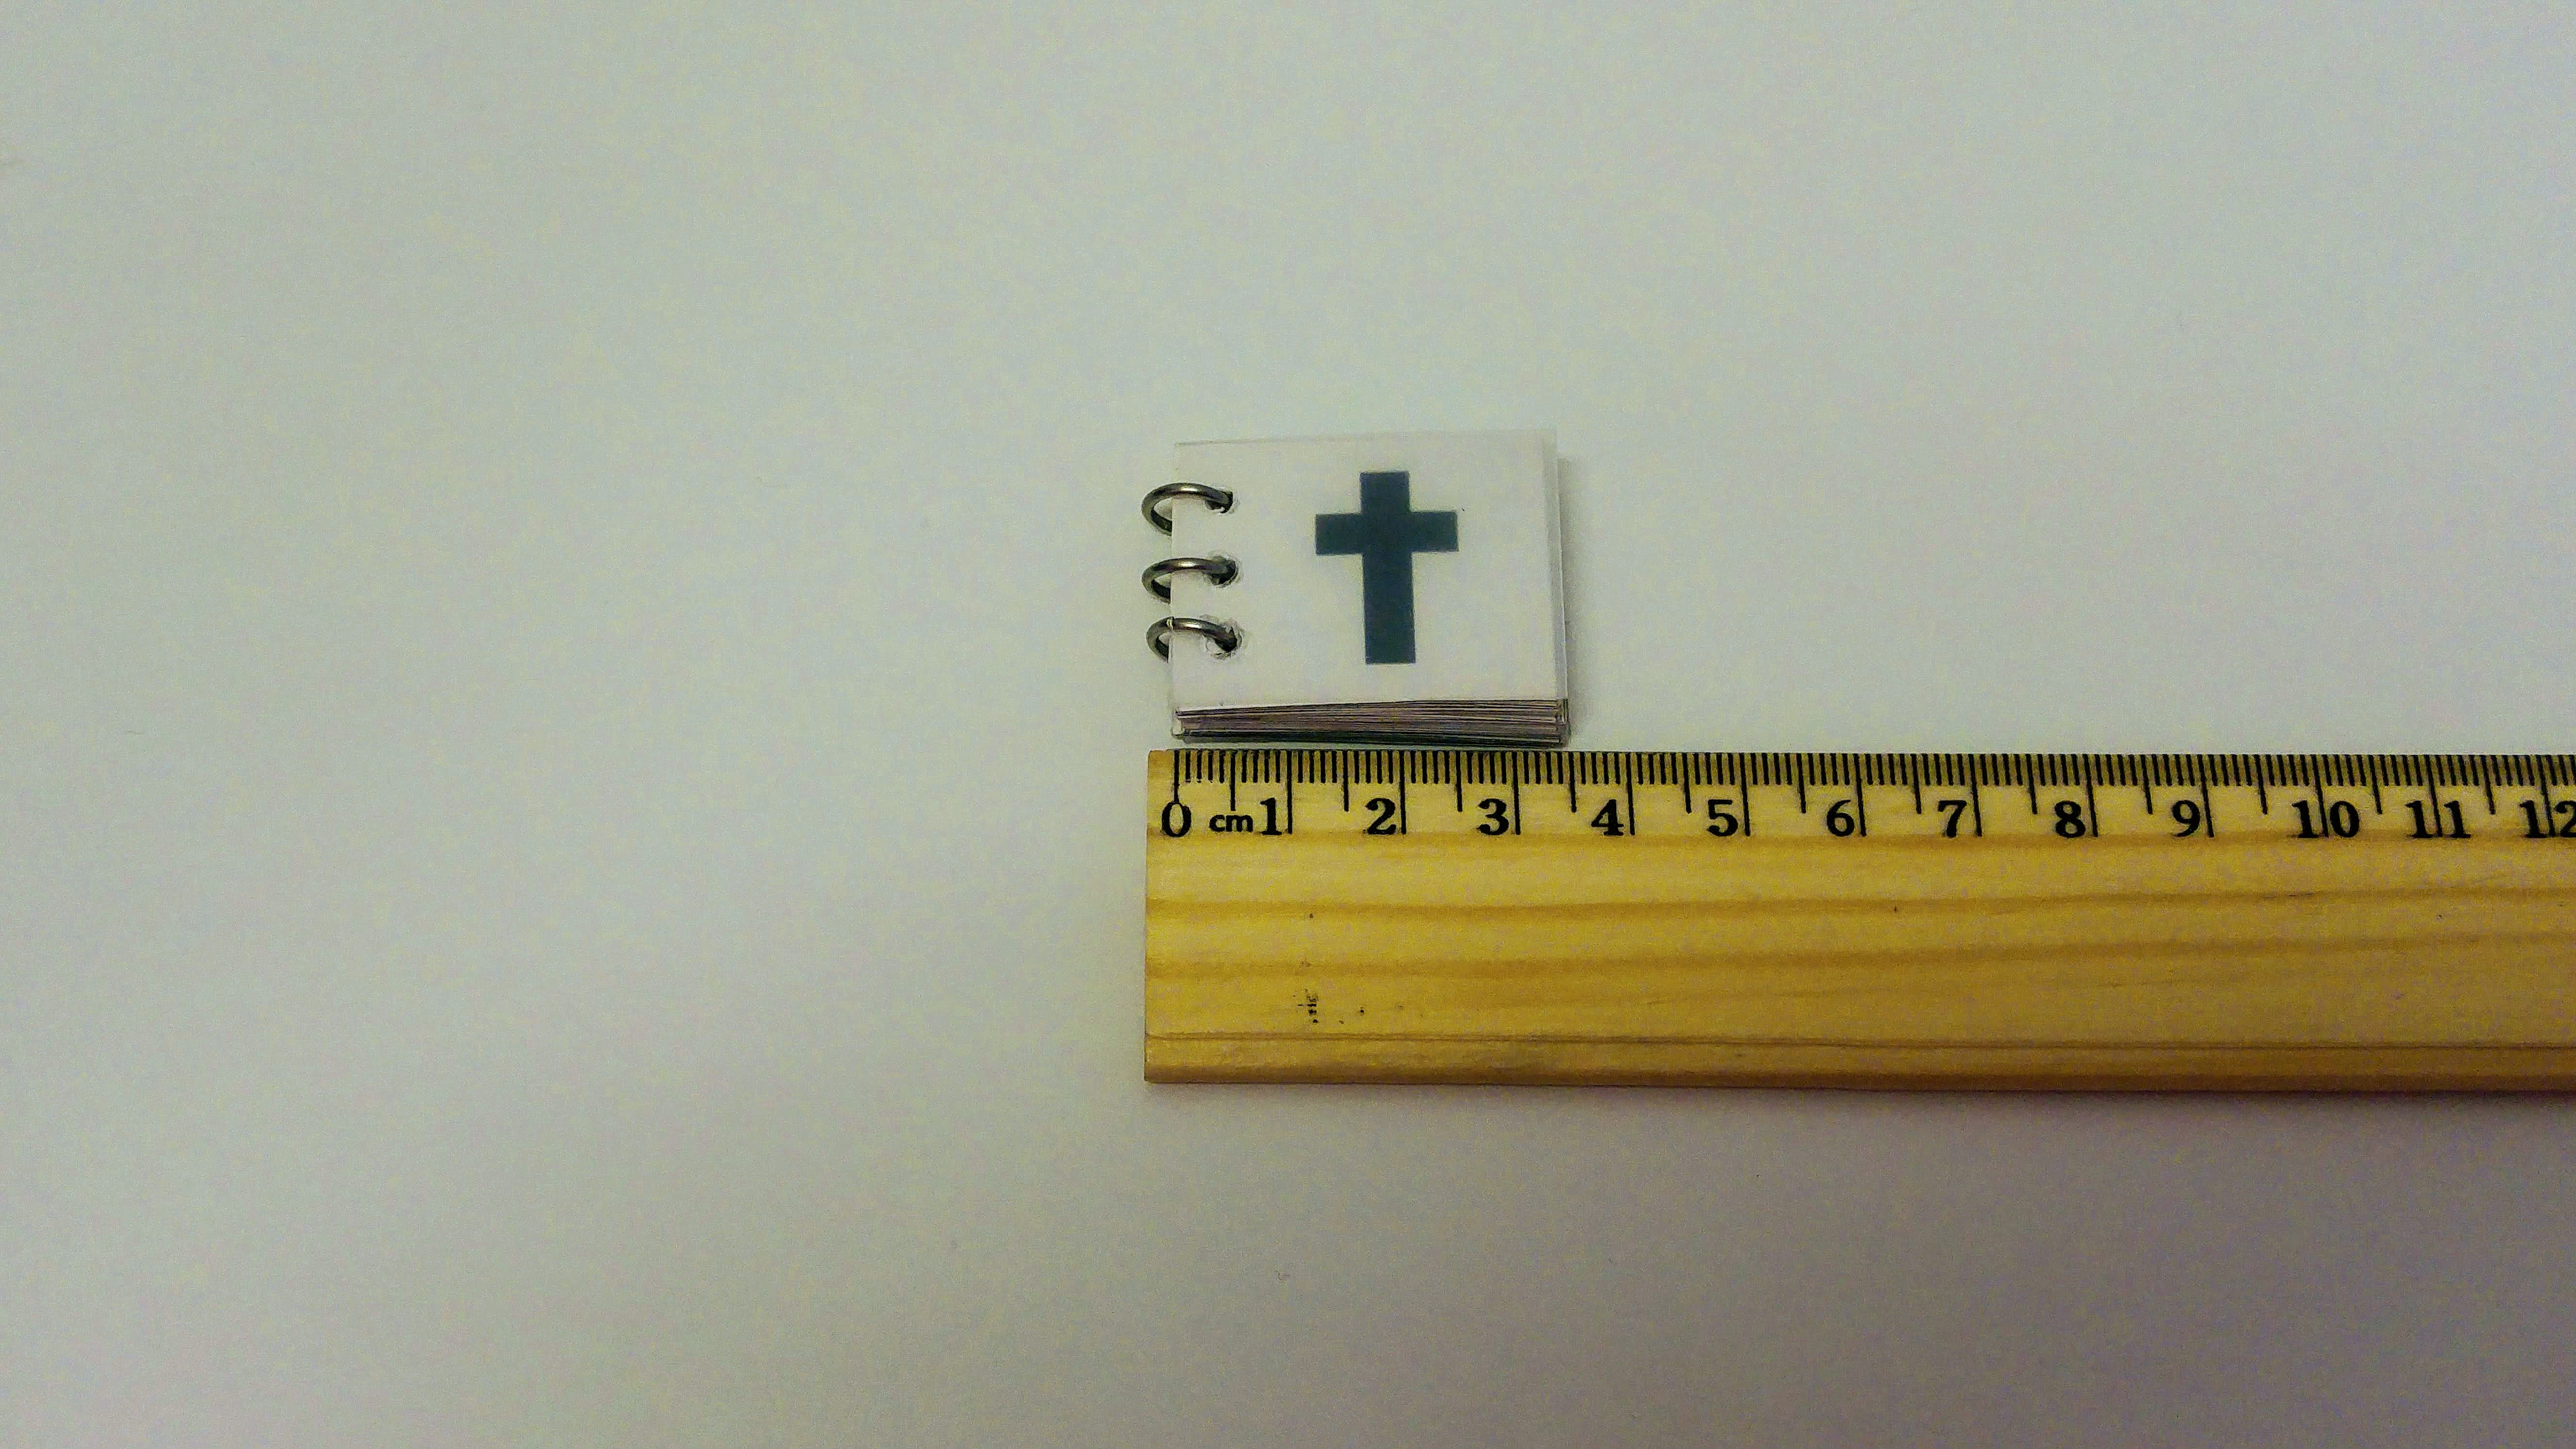 The prayer book on top of a ruler, showing 3.5 centimeters long, so 2.7 by 3.5 centimeters, shown just on a plain table.